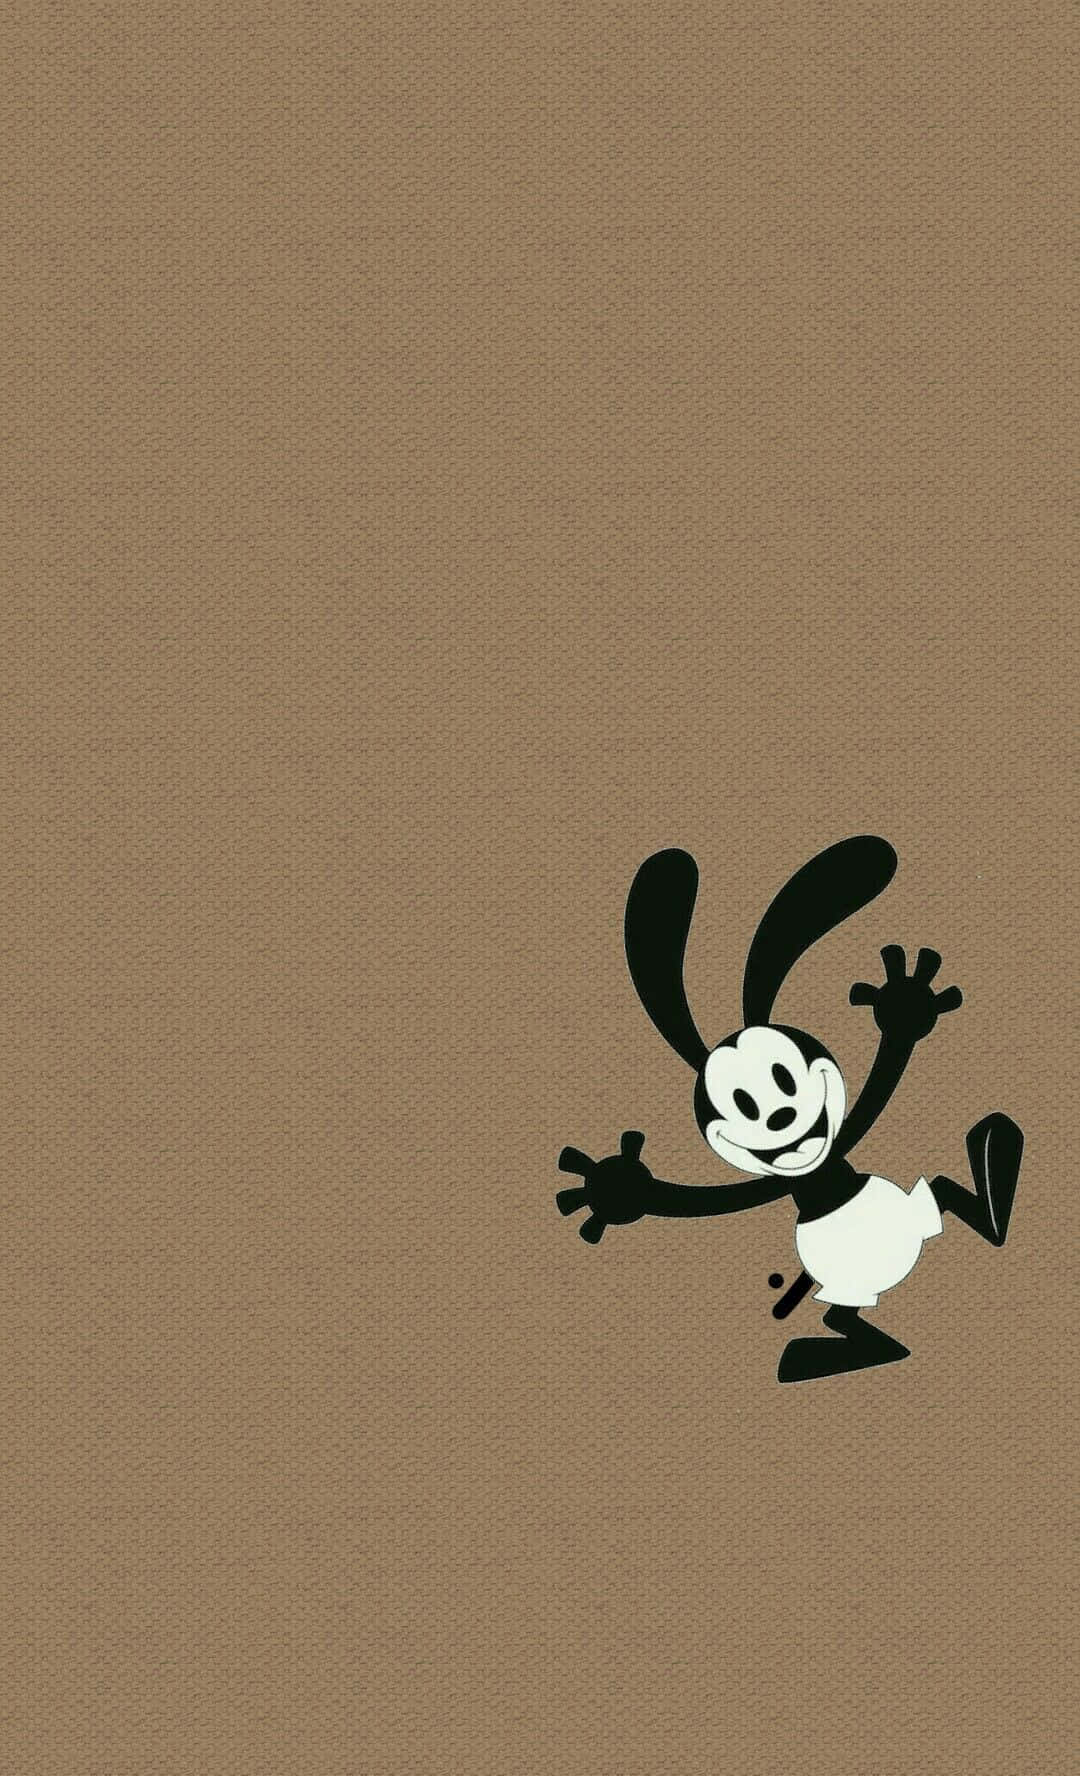 Oswald The Lucky Rabbit Cheerful Pose Wallpaper